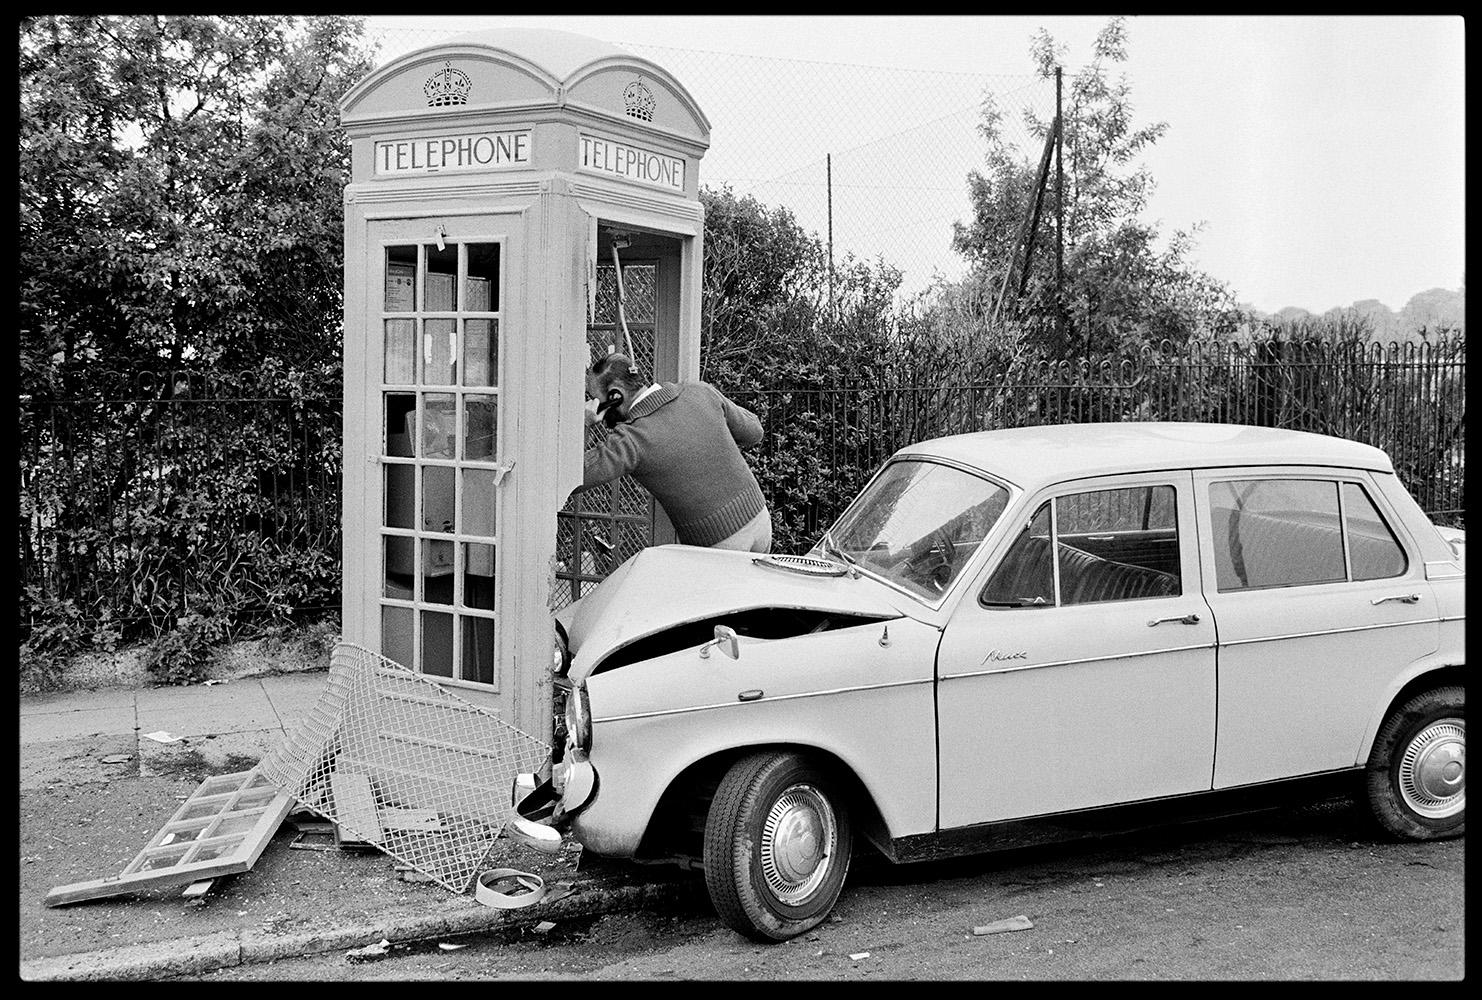 Crash Call Phone Box

By Arthur Steel 

Paper size: 34 x 26" / 86x66 cm

Silver Gelatin Print
1970 (printed later)
unframed
hand signed
limited edition of 50


note other print sizes and framing options are available, please enquire for